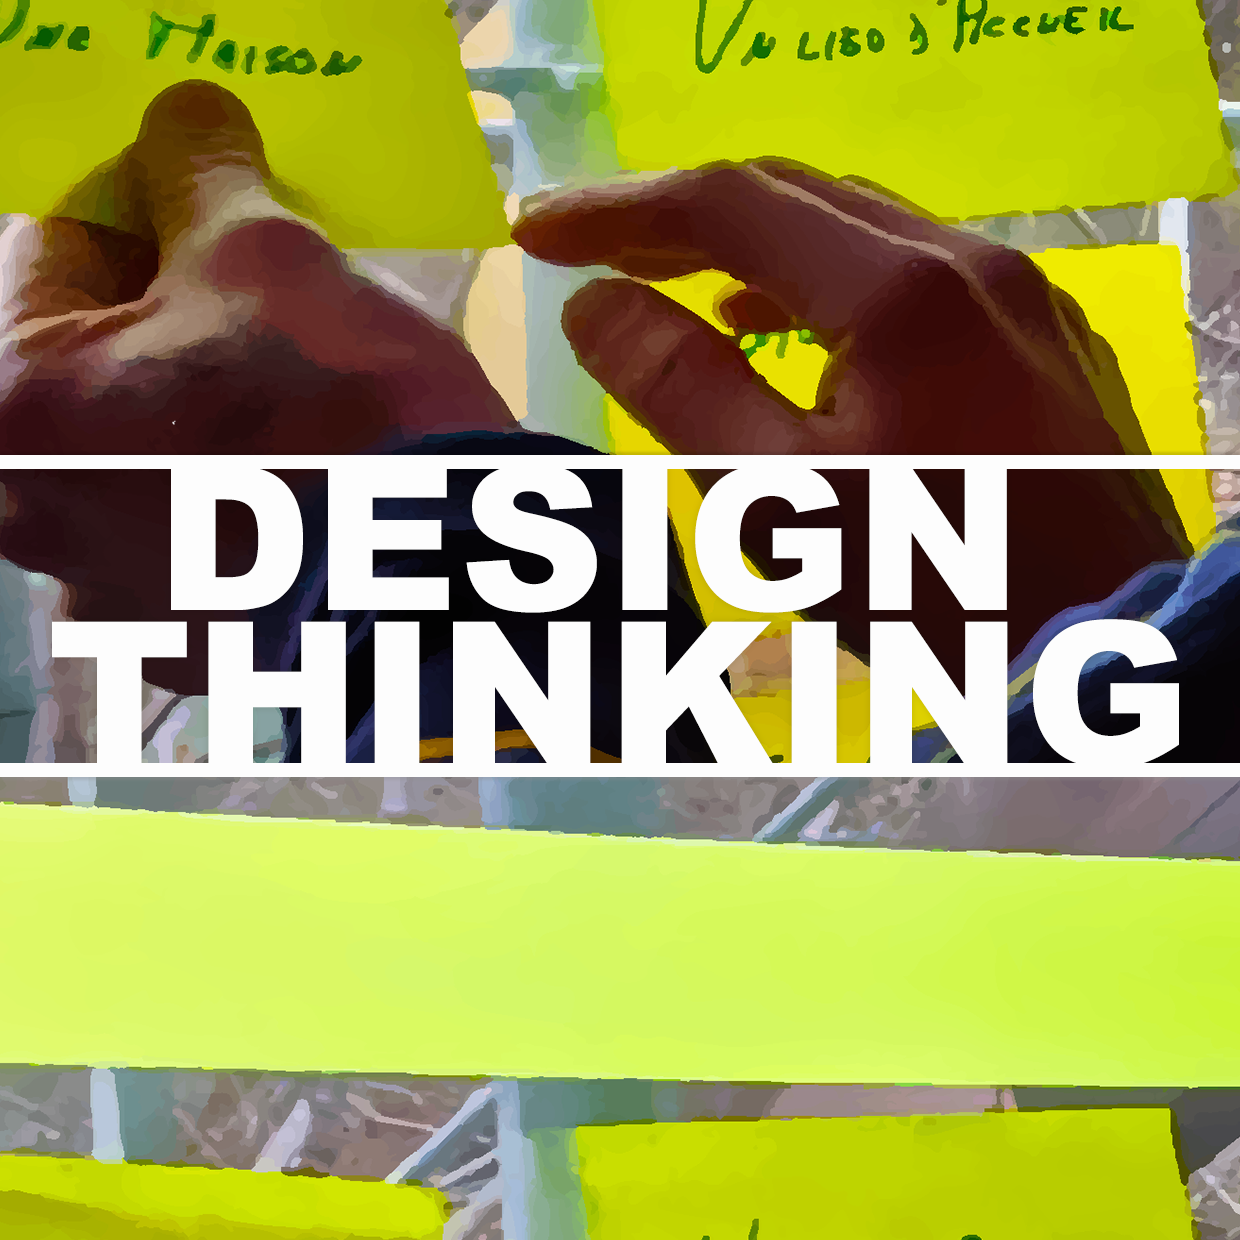 During our design thinking workshops, we assist teams to find THE solution of their problem